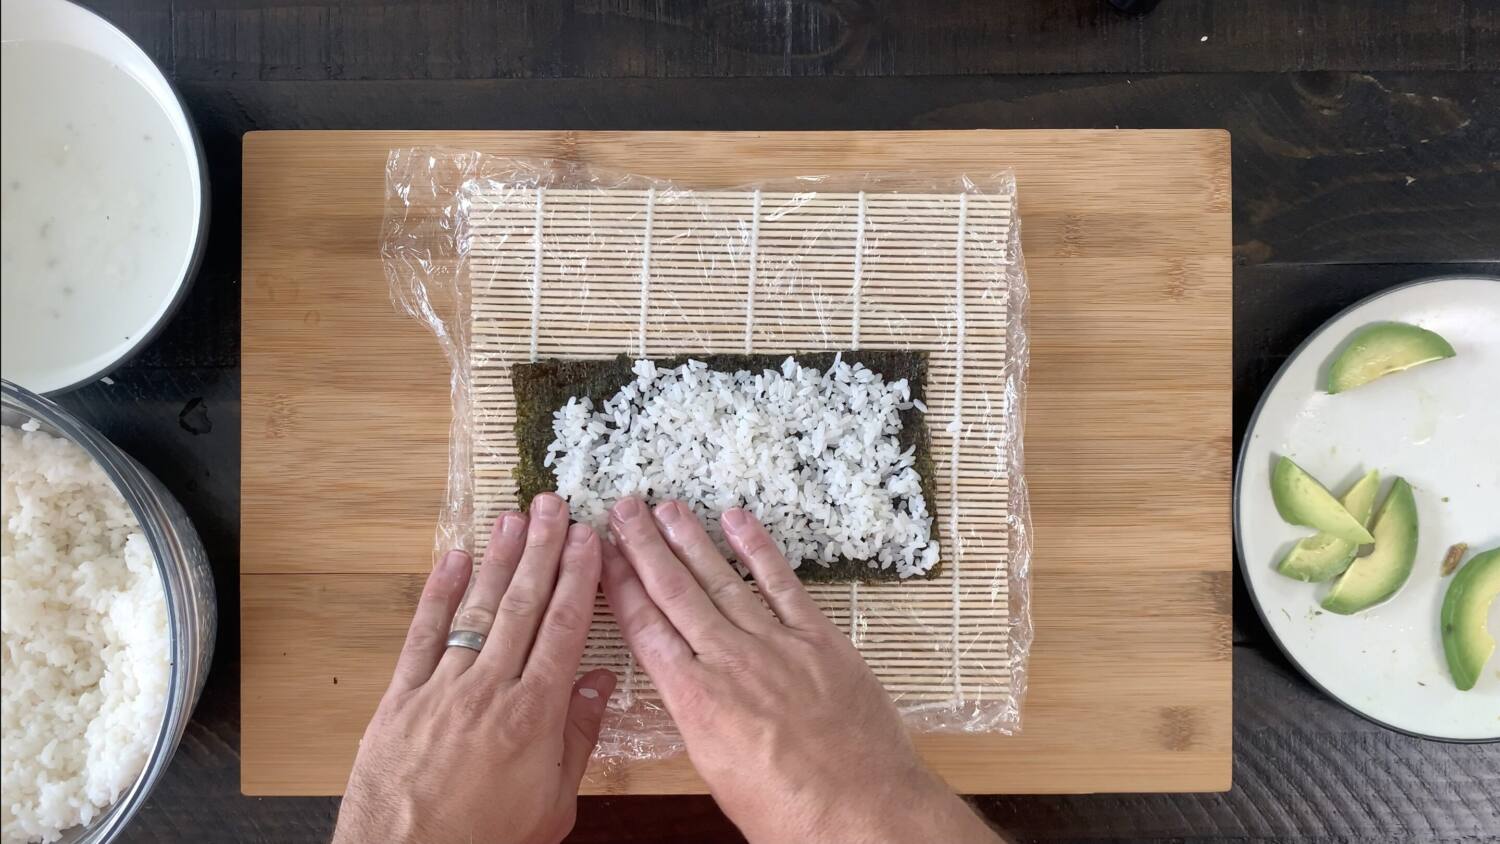 Spread the rice over the nori sheet for the California roll